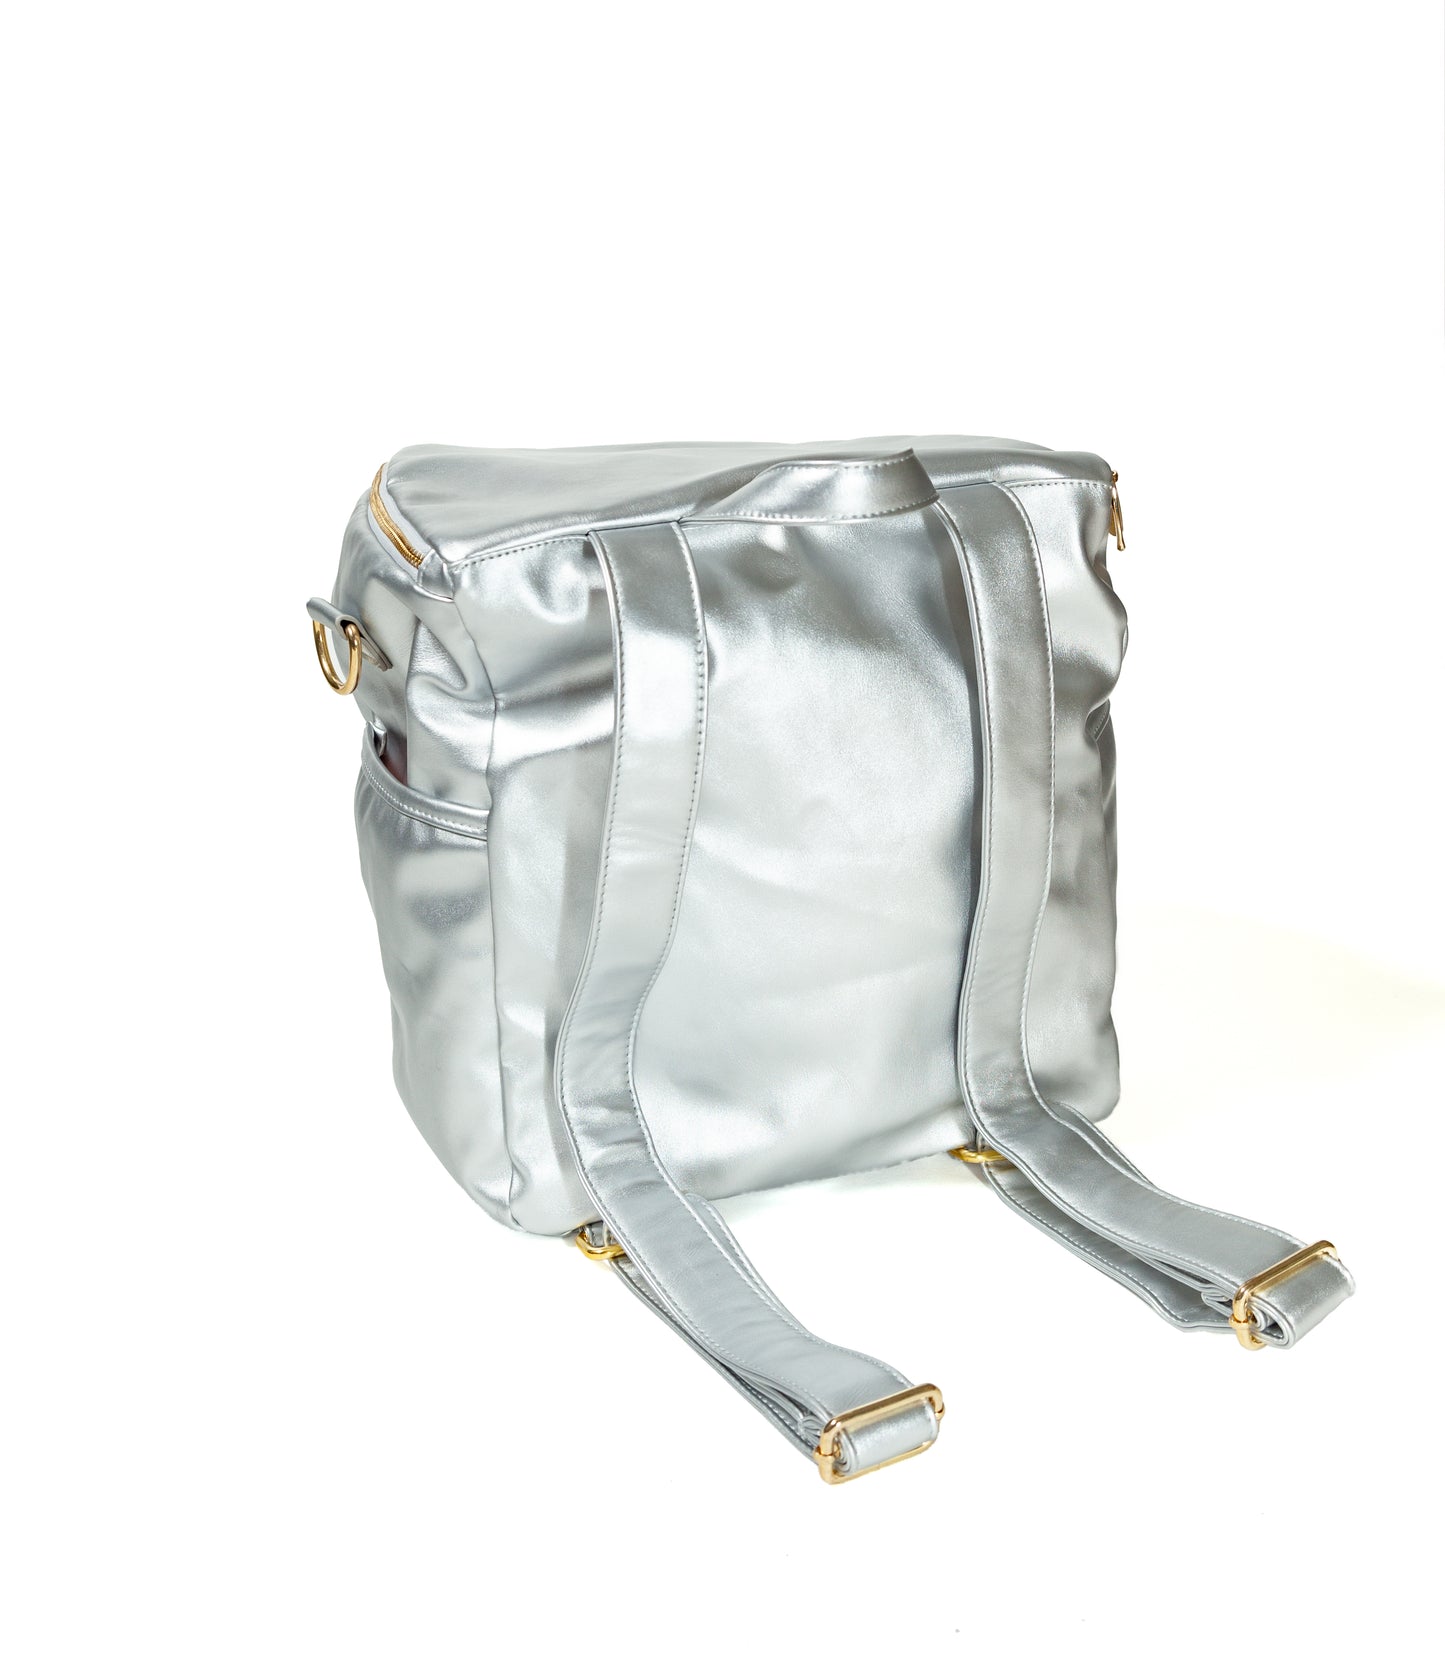 Metallic Silver Leather Back Pack